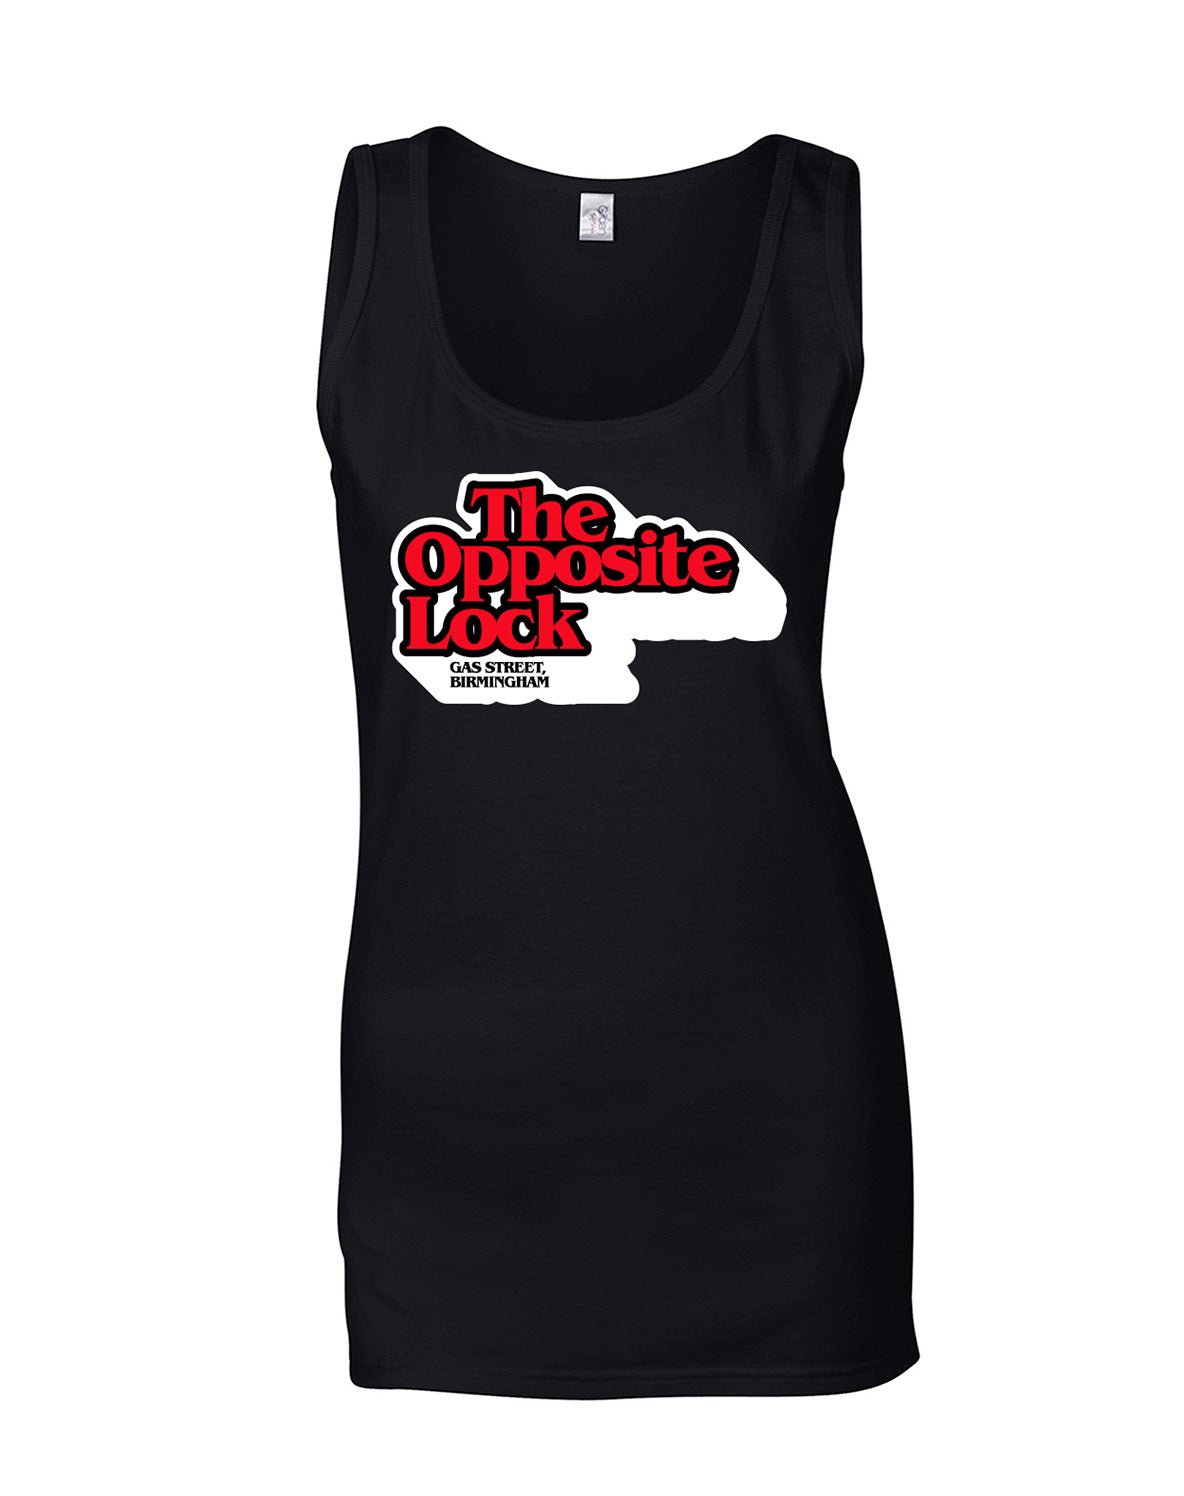 Opposite Lock ladies fit vest - various colours - Dirty Stop Outs